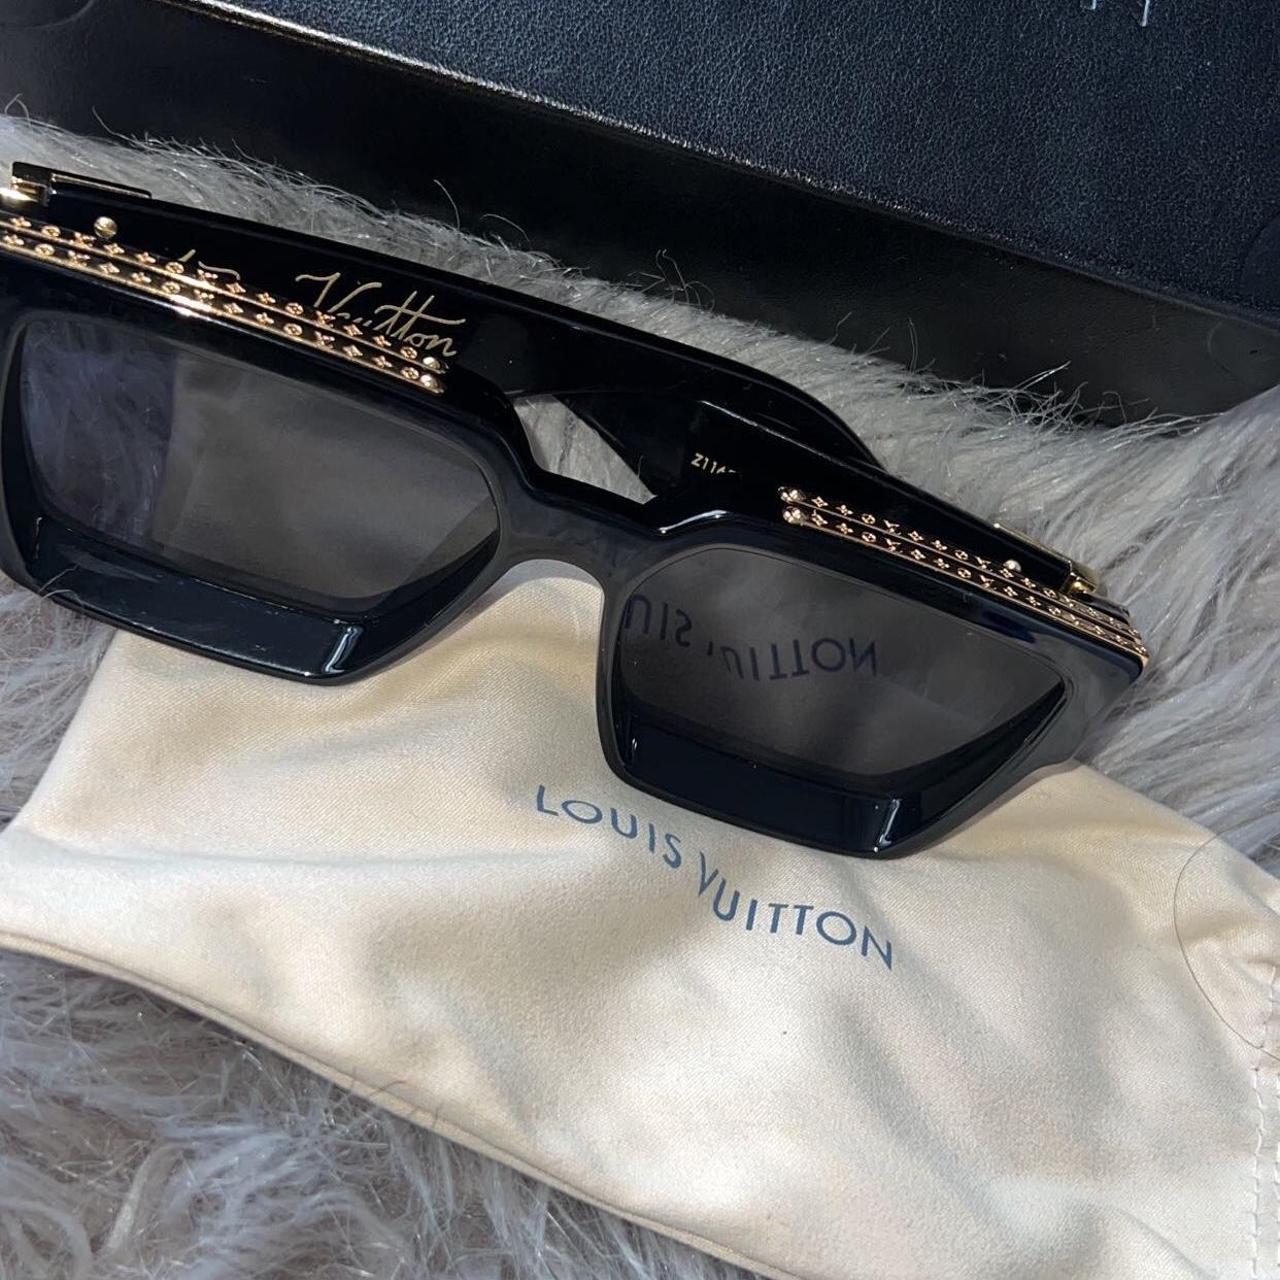 Louis Vuitton sunglasses in white with bling bindi